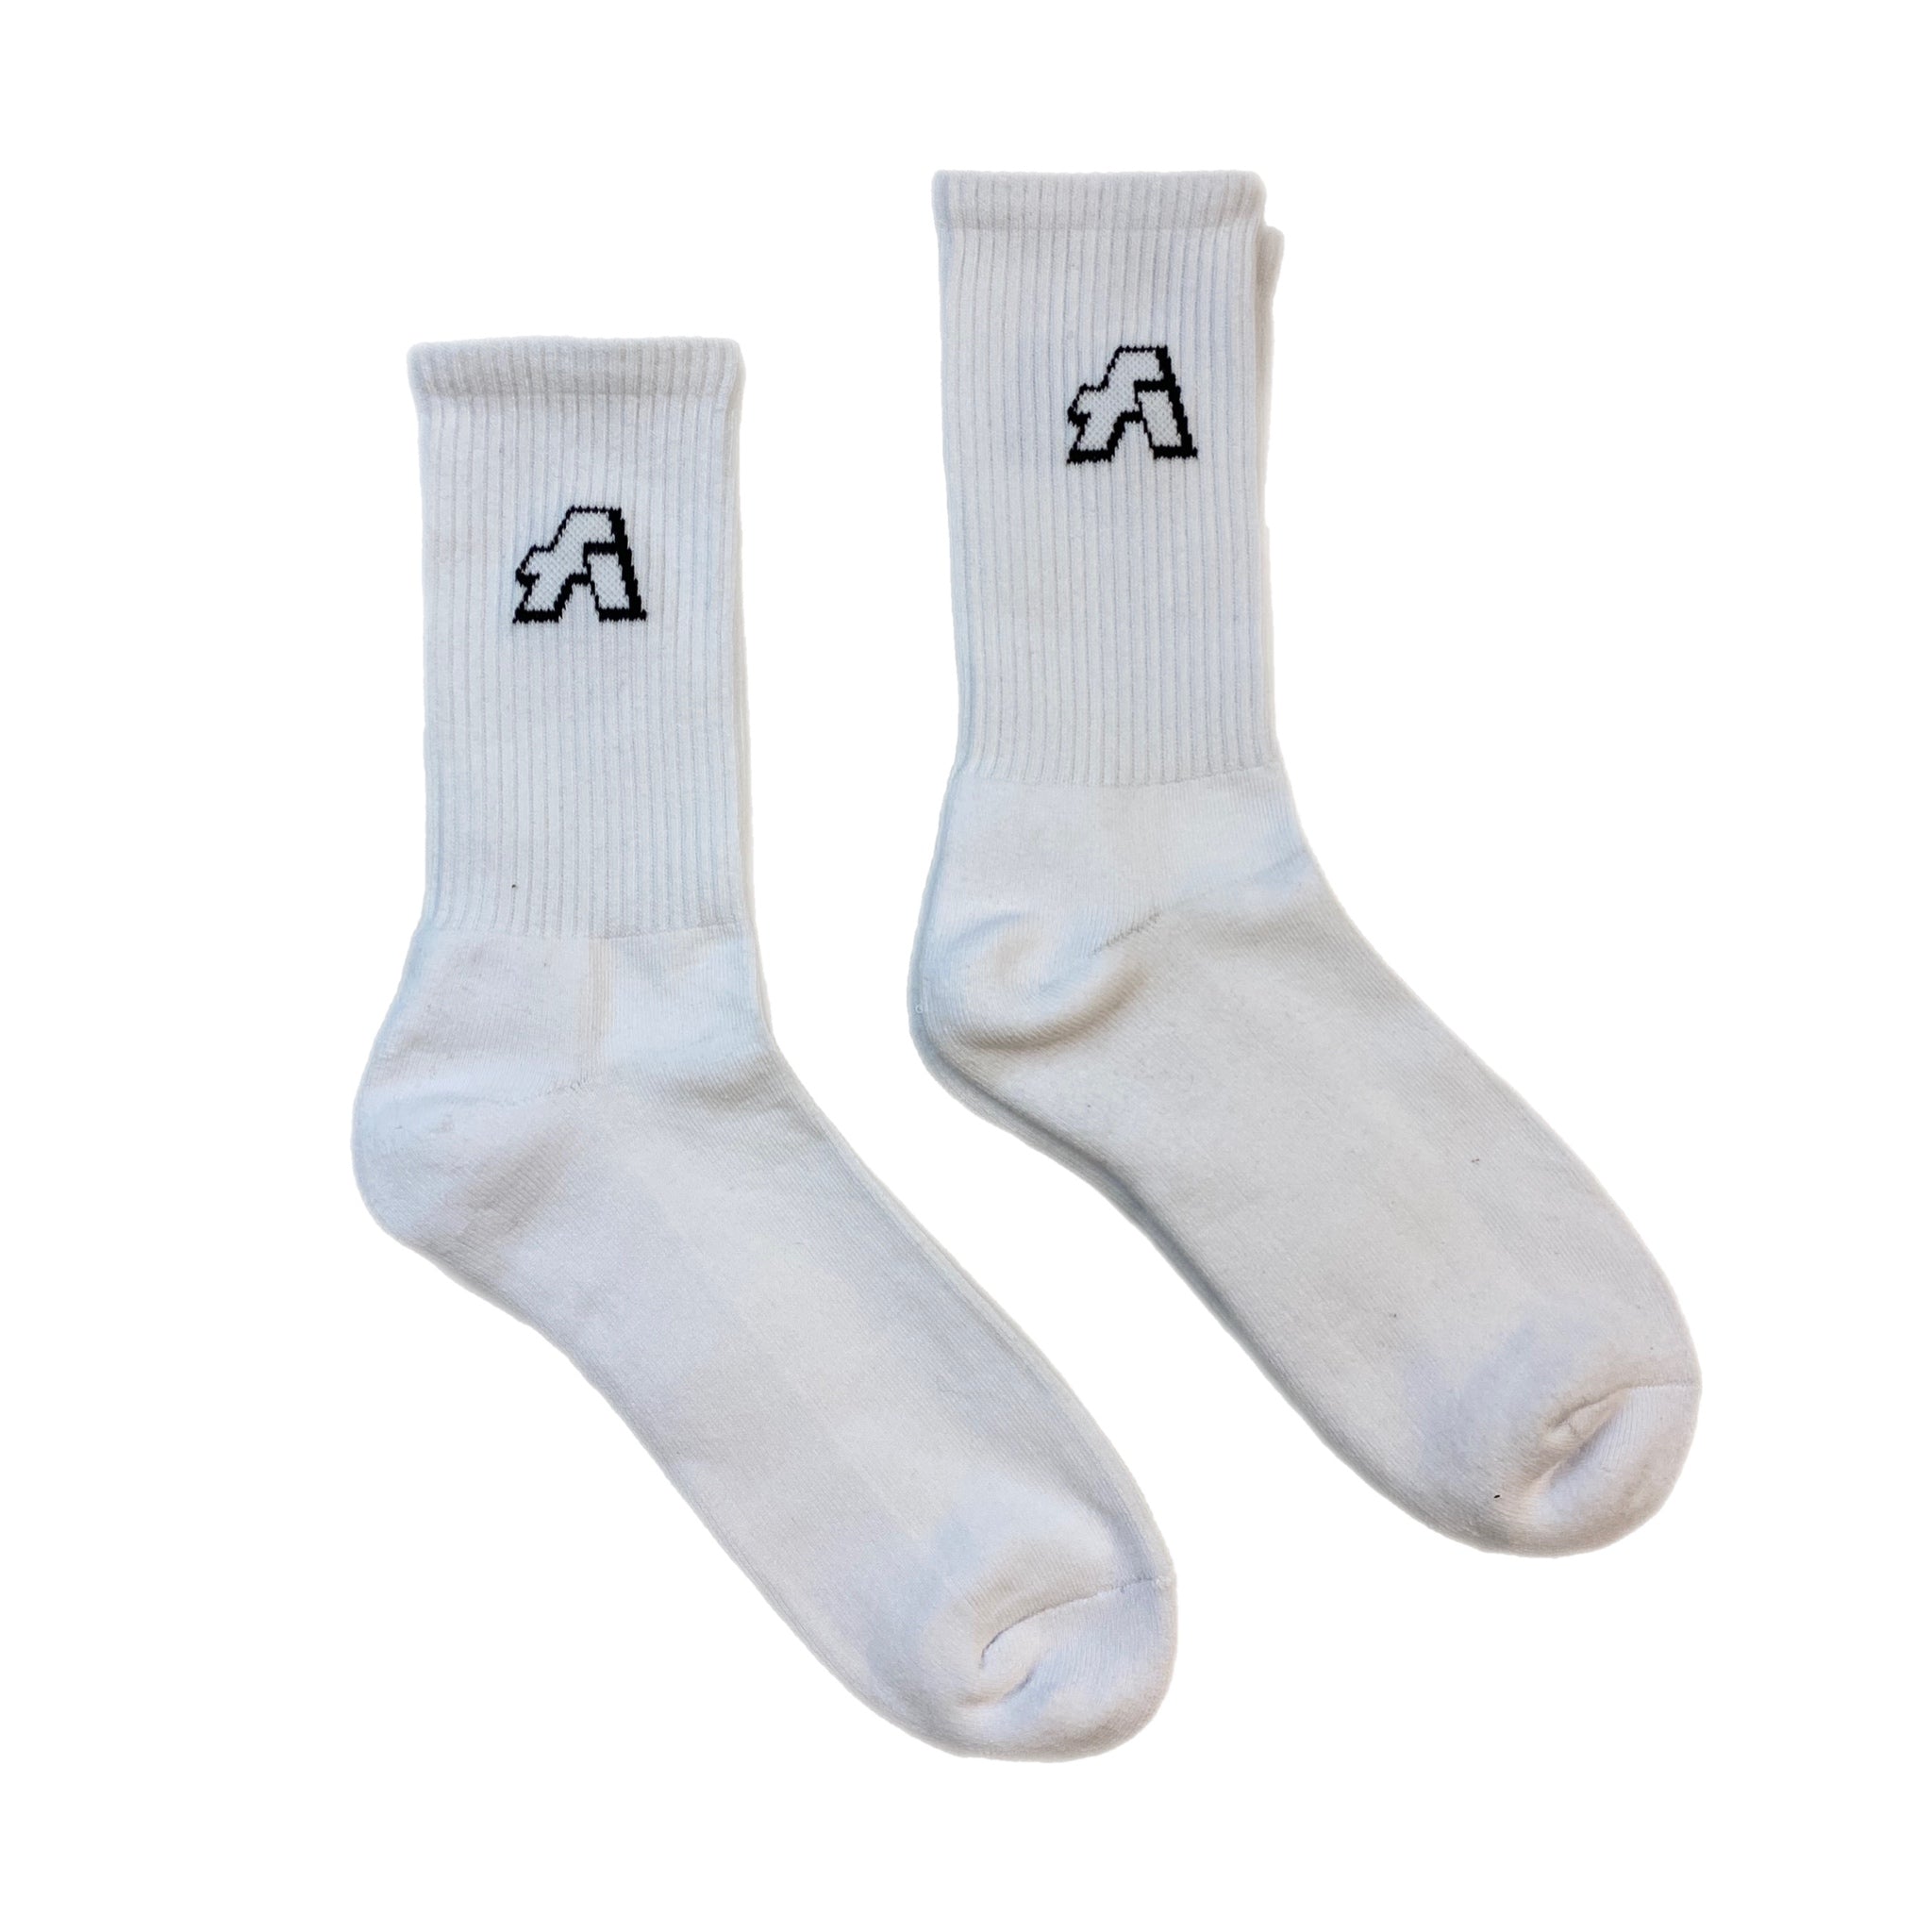 From Another Socks Two Pack White